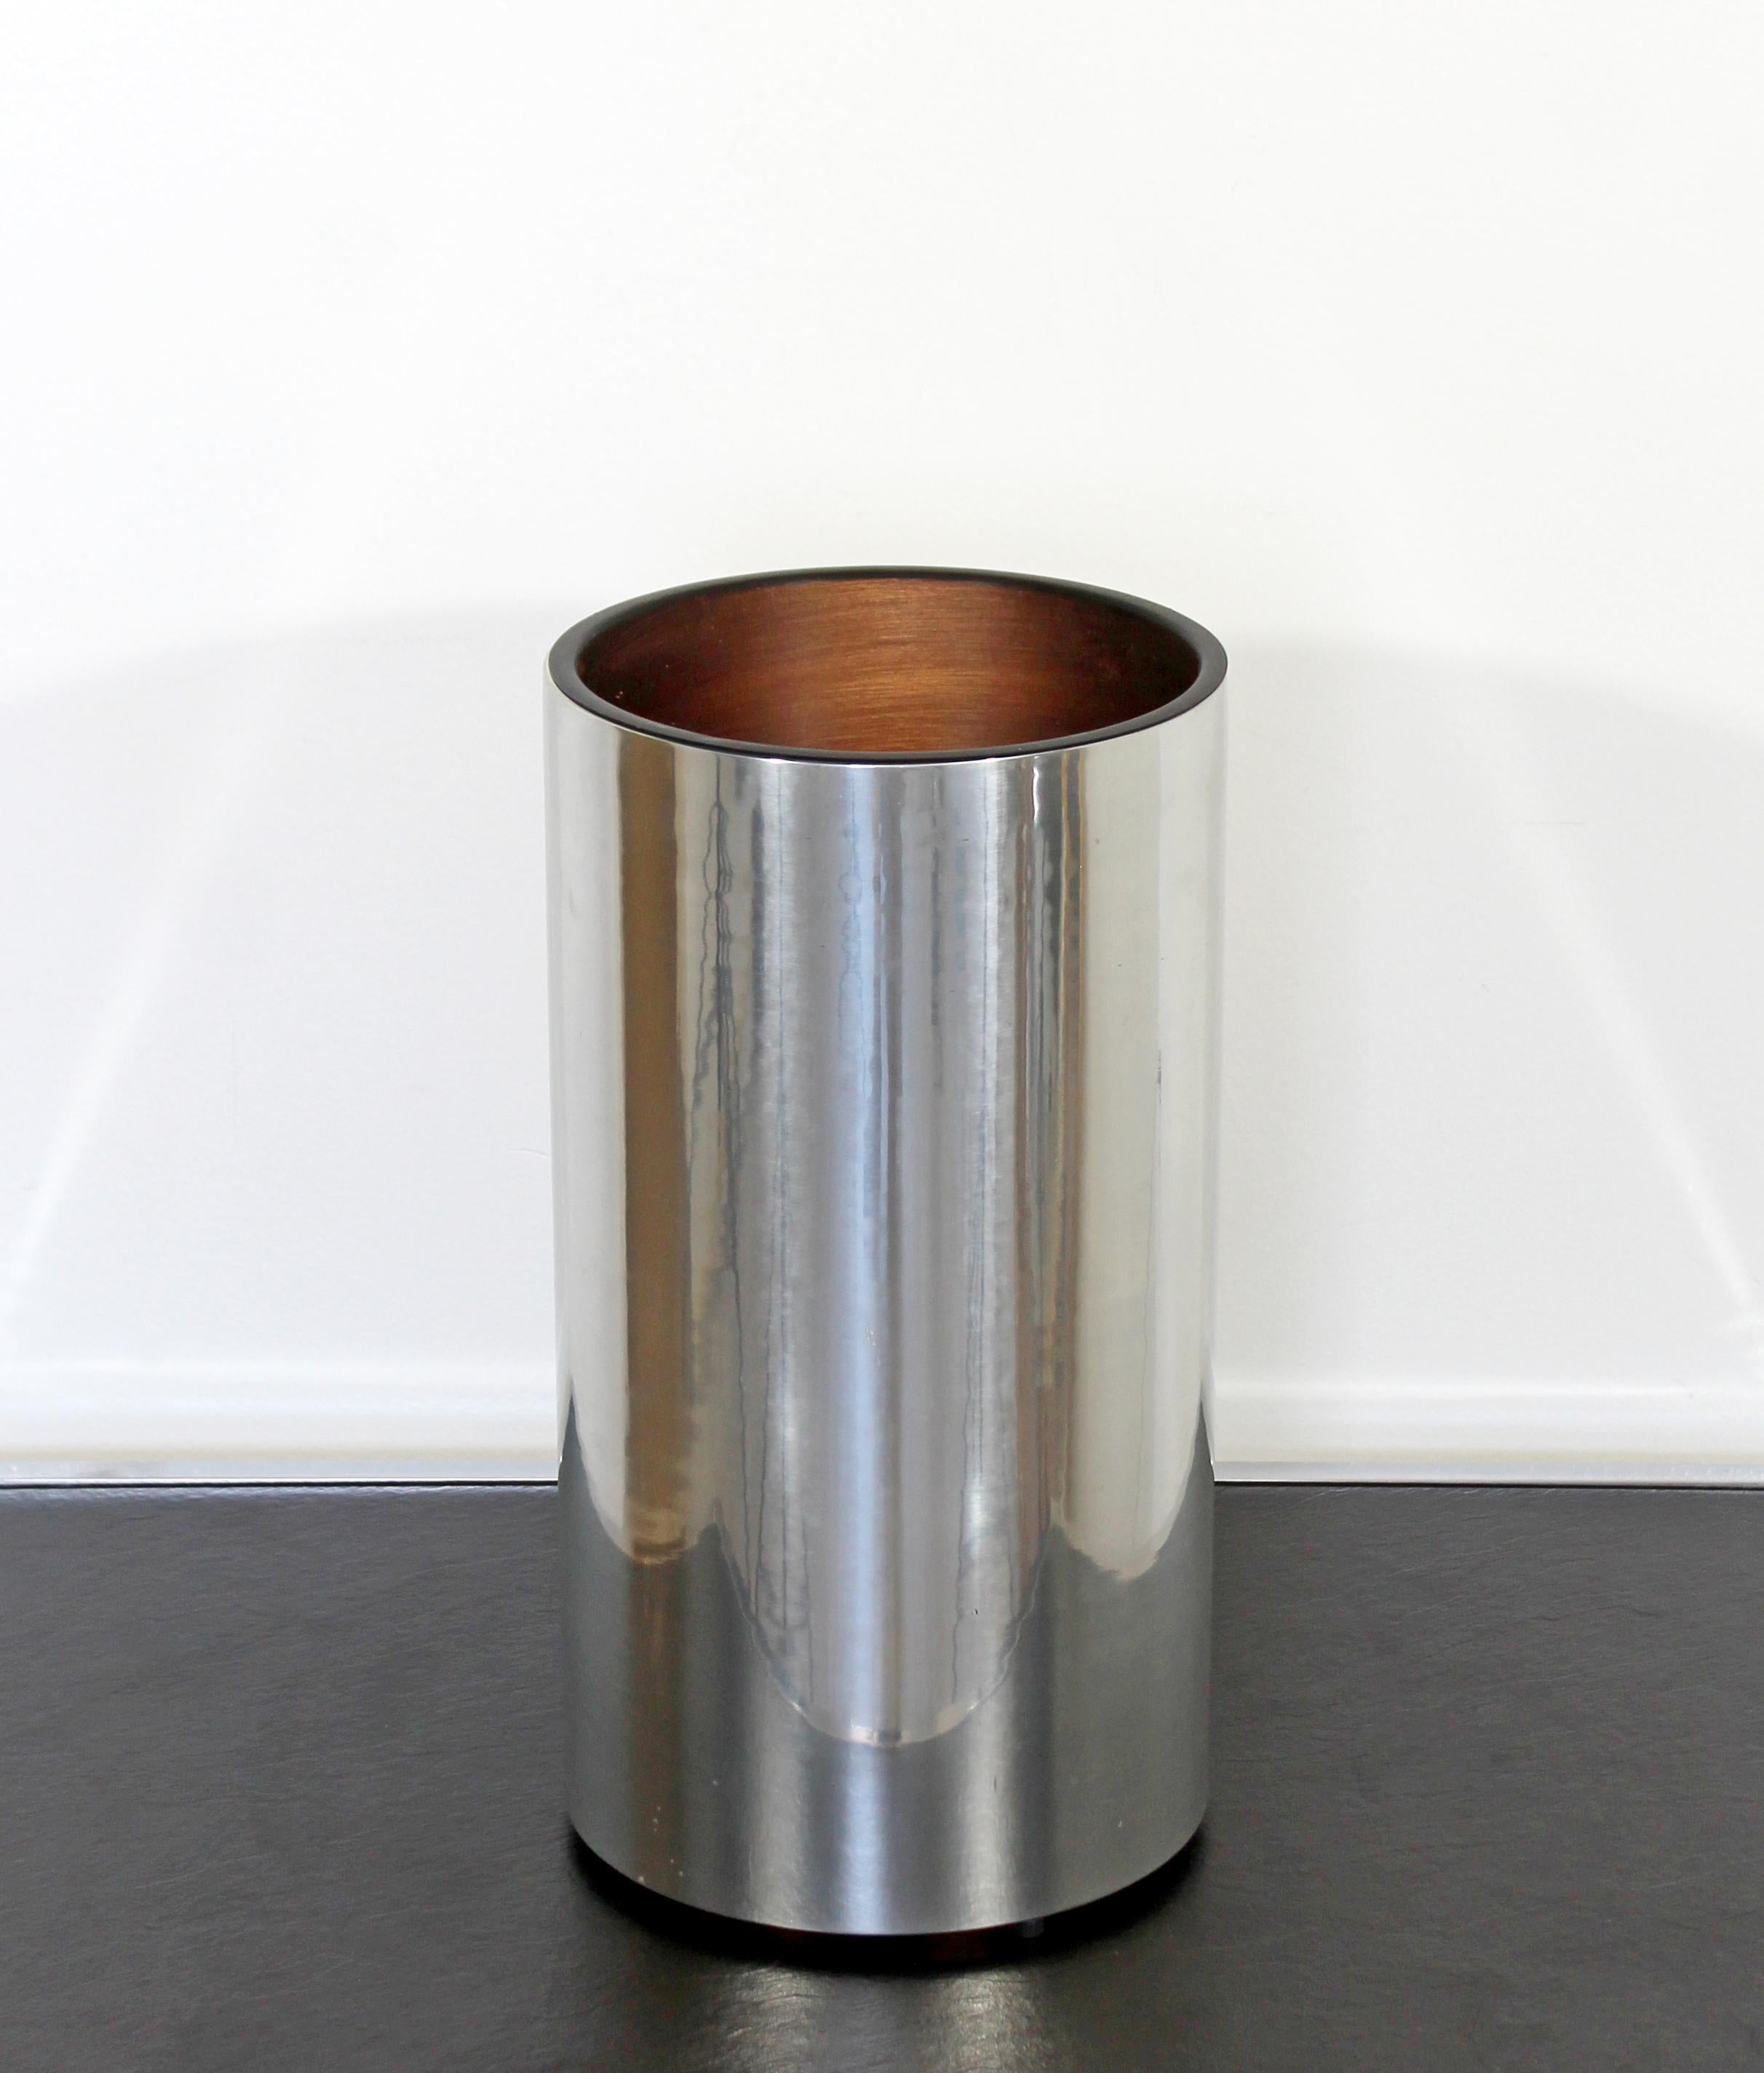 For your consideration is a sweet, cylindrical chrome uplight table lamp, in the can style, by Robert Sonneman, with a tag, circa the 1960s-1970s. In very good condition. The dimensions are 8